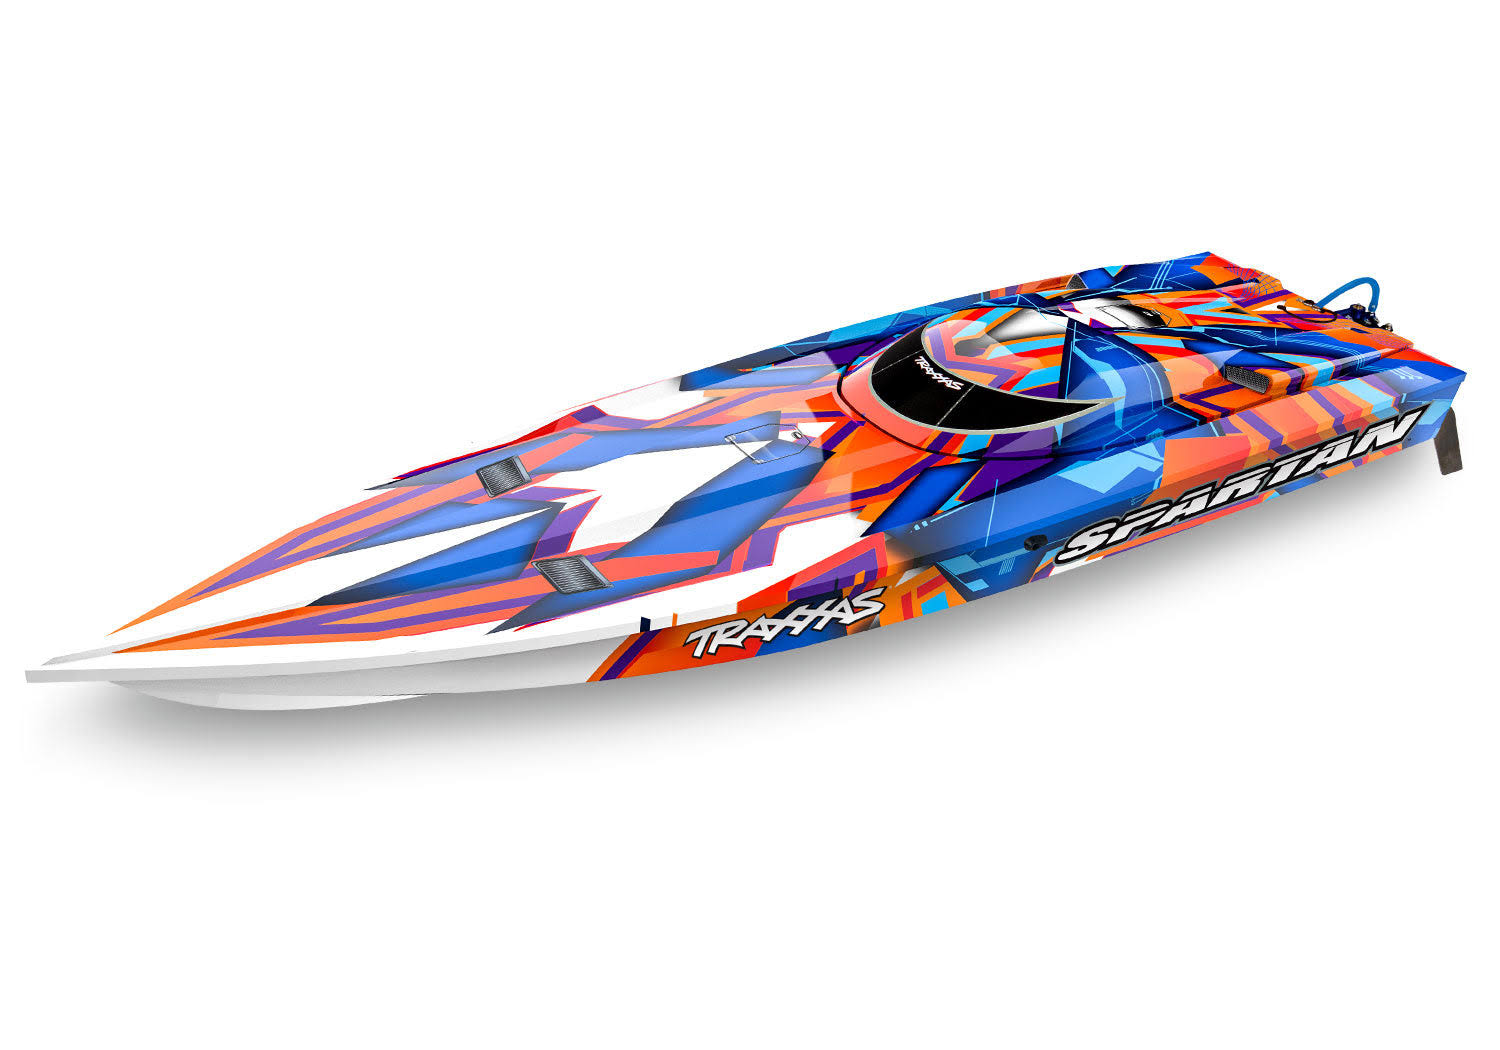 Traxxas 57076-4 Spartan 36in Brushless Muscleboat 1/10 Electric RC Boat Orange